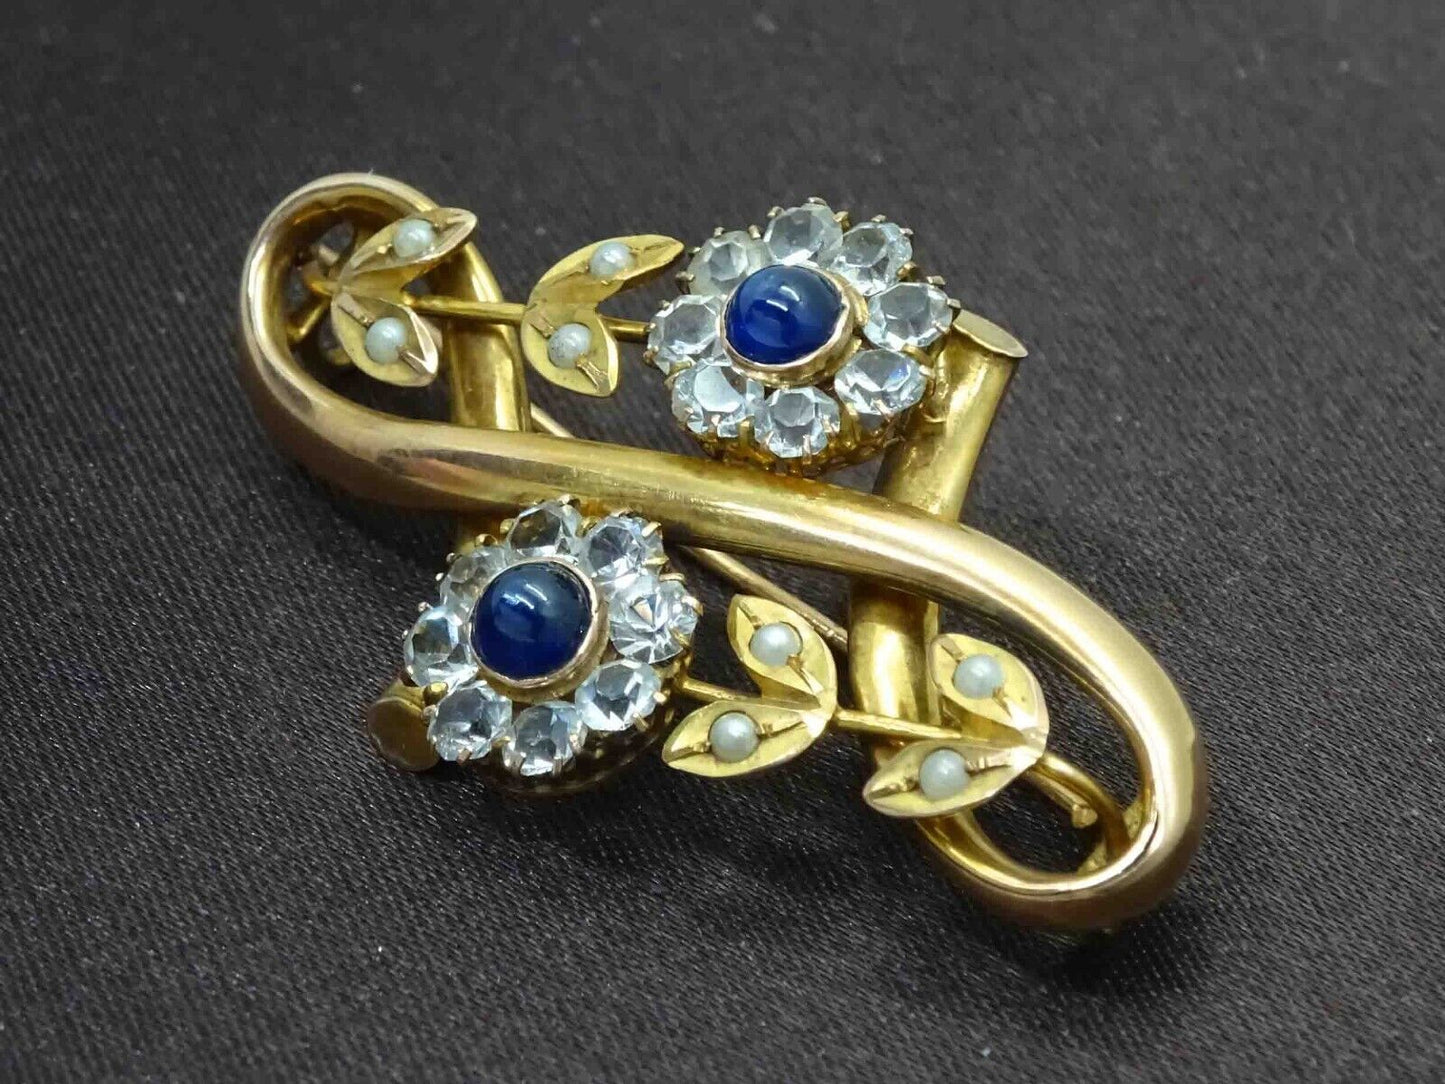 Antique EROV Sapphire & Seed Pearl & Crystal Floral Brooch Pin 14k Gold